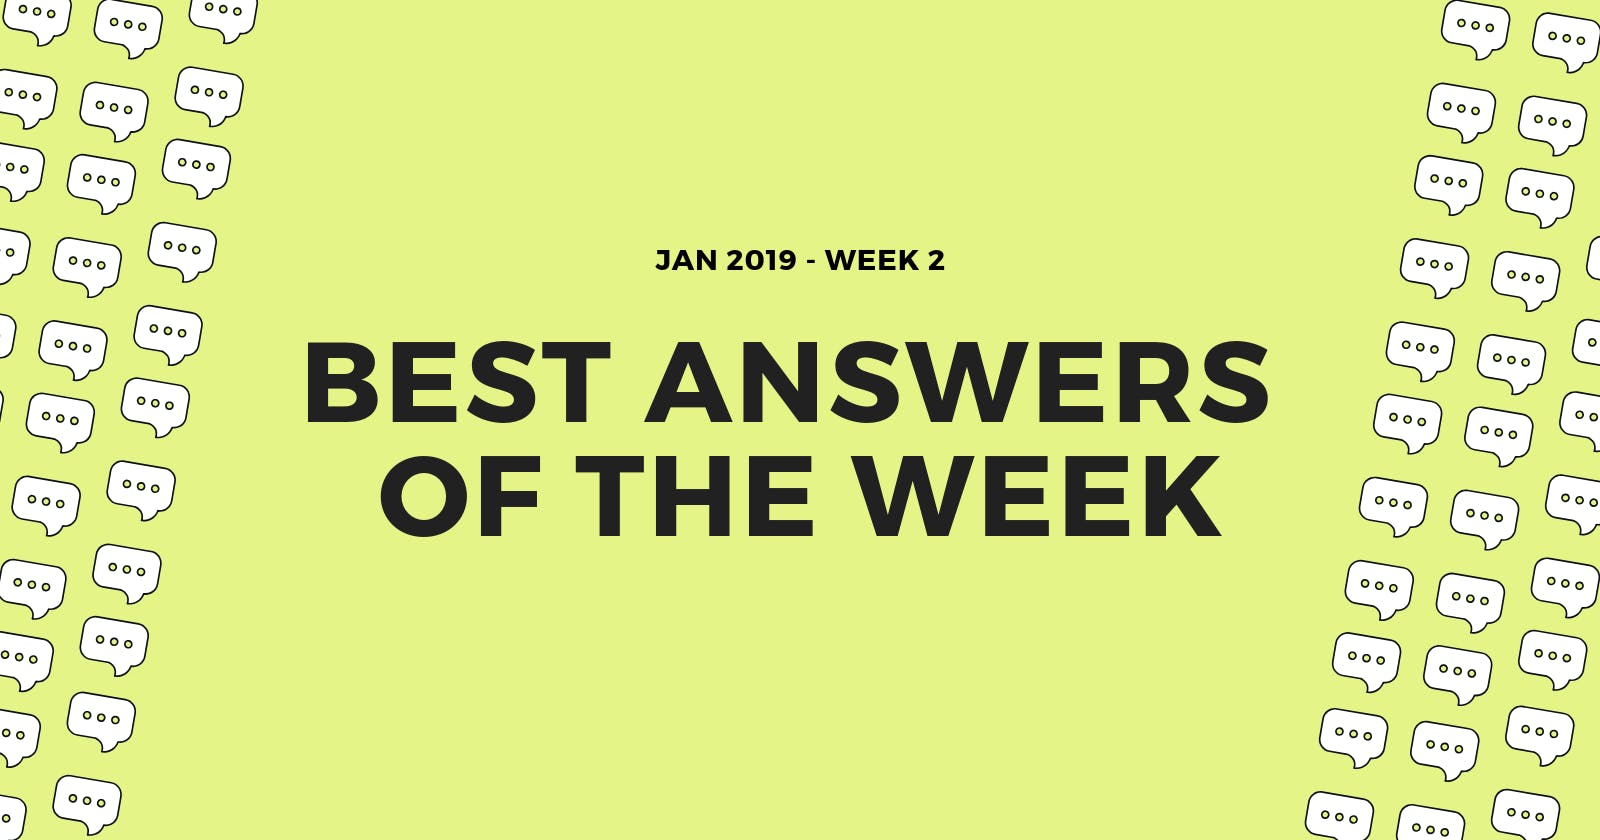 Best answers of the week: January 2019 (Week 2)